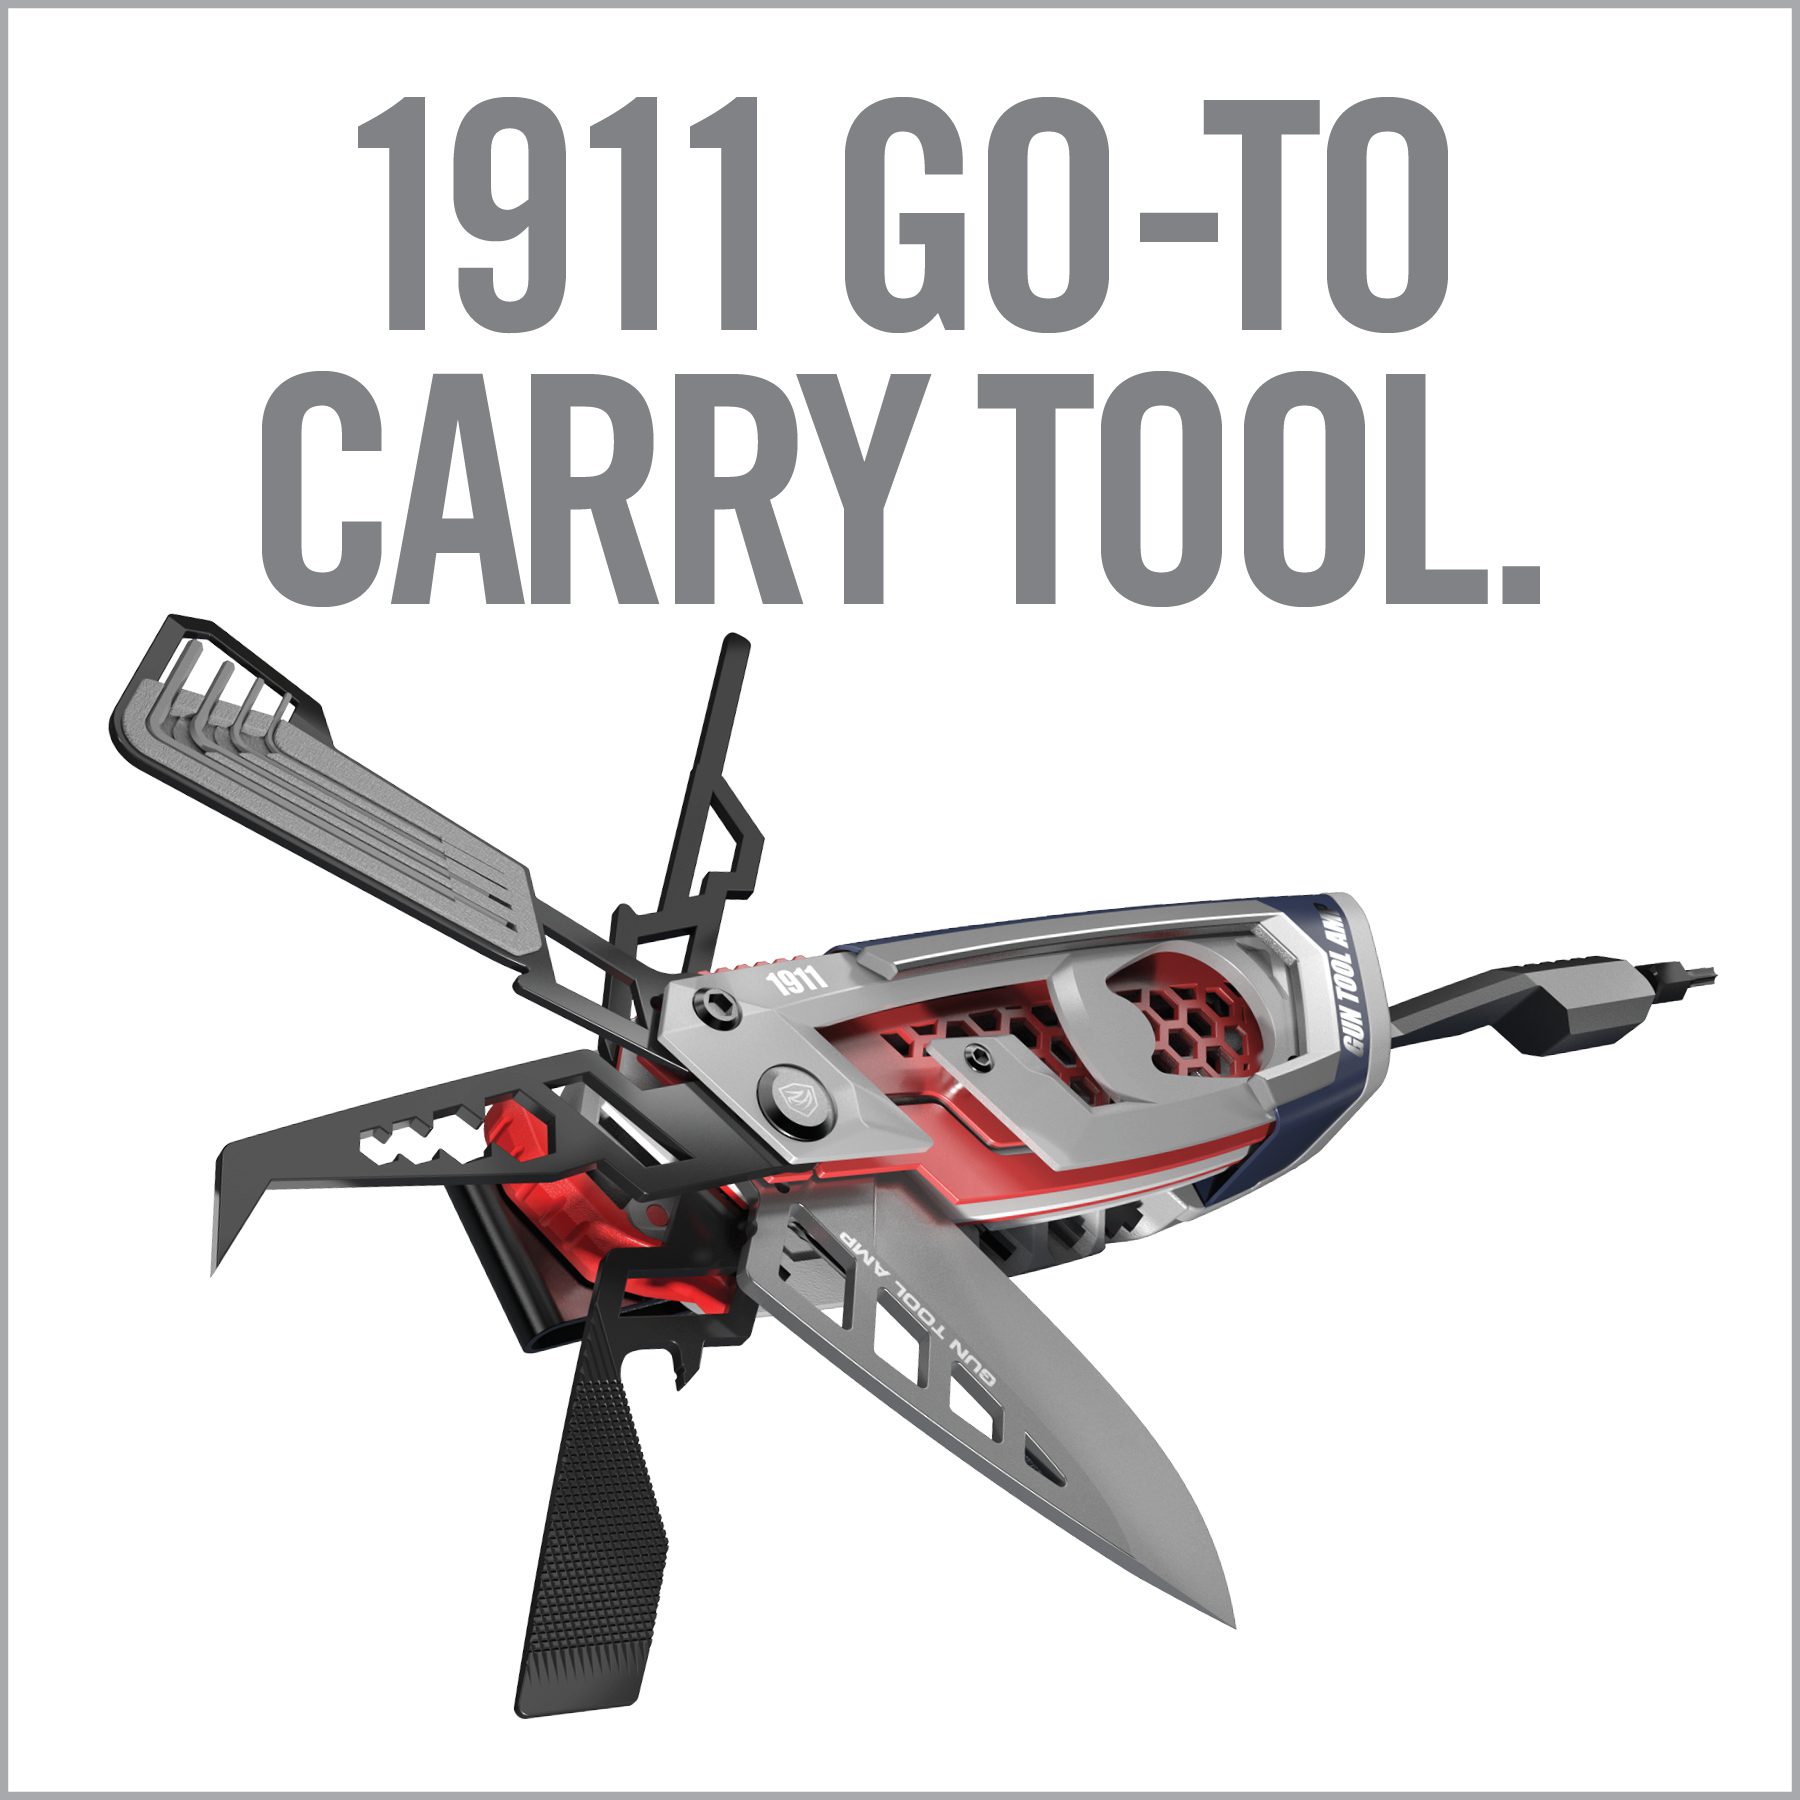 an advertisement for a knife sharpener with the words 1911 go - to carry tool